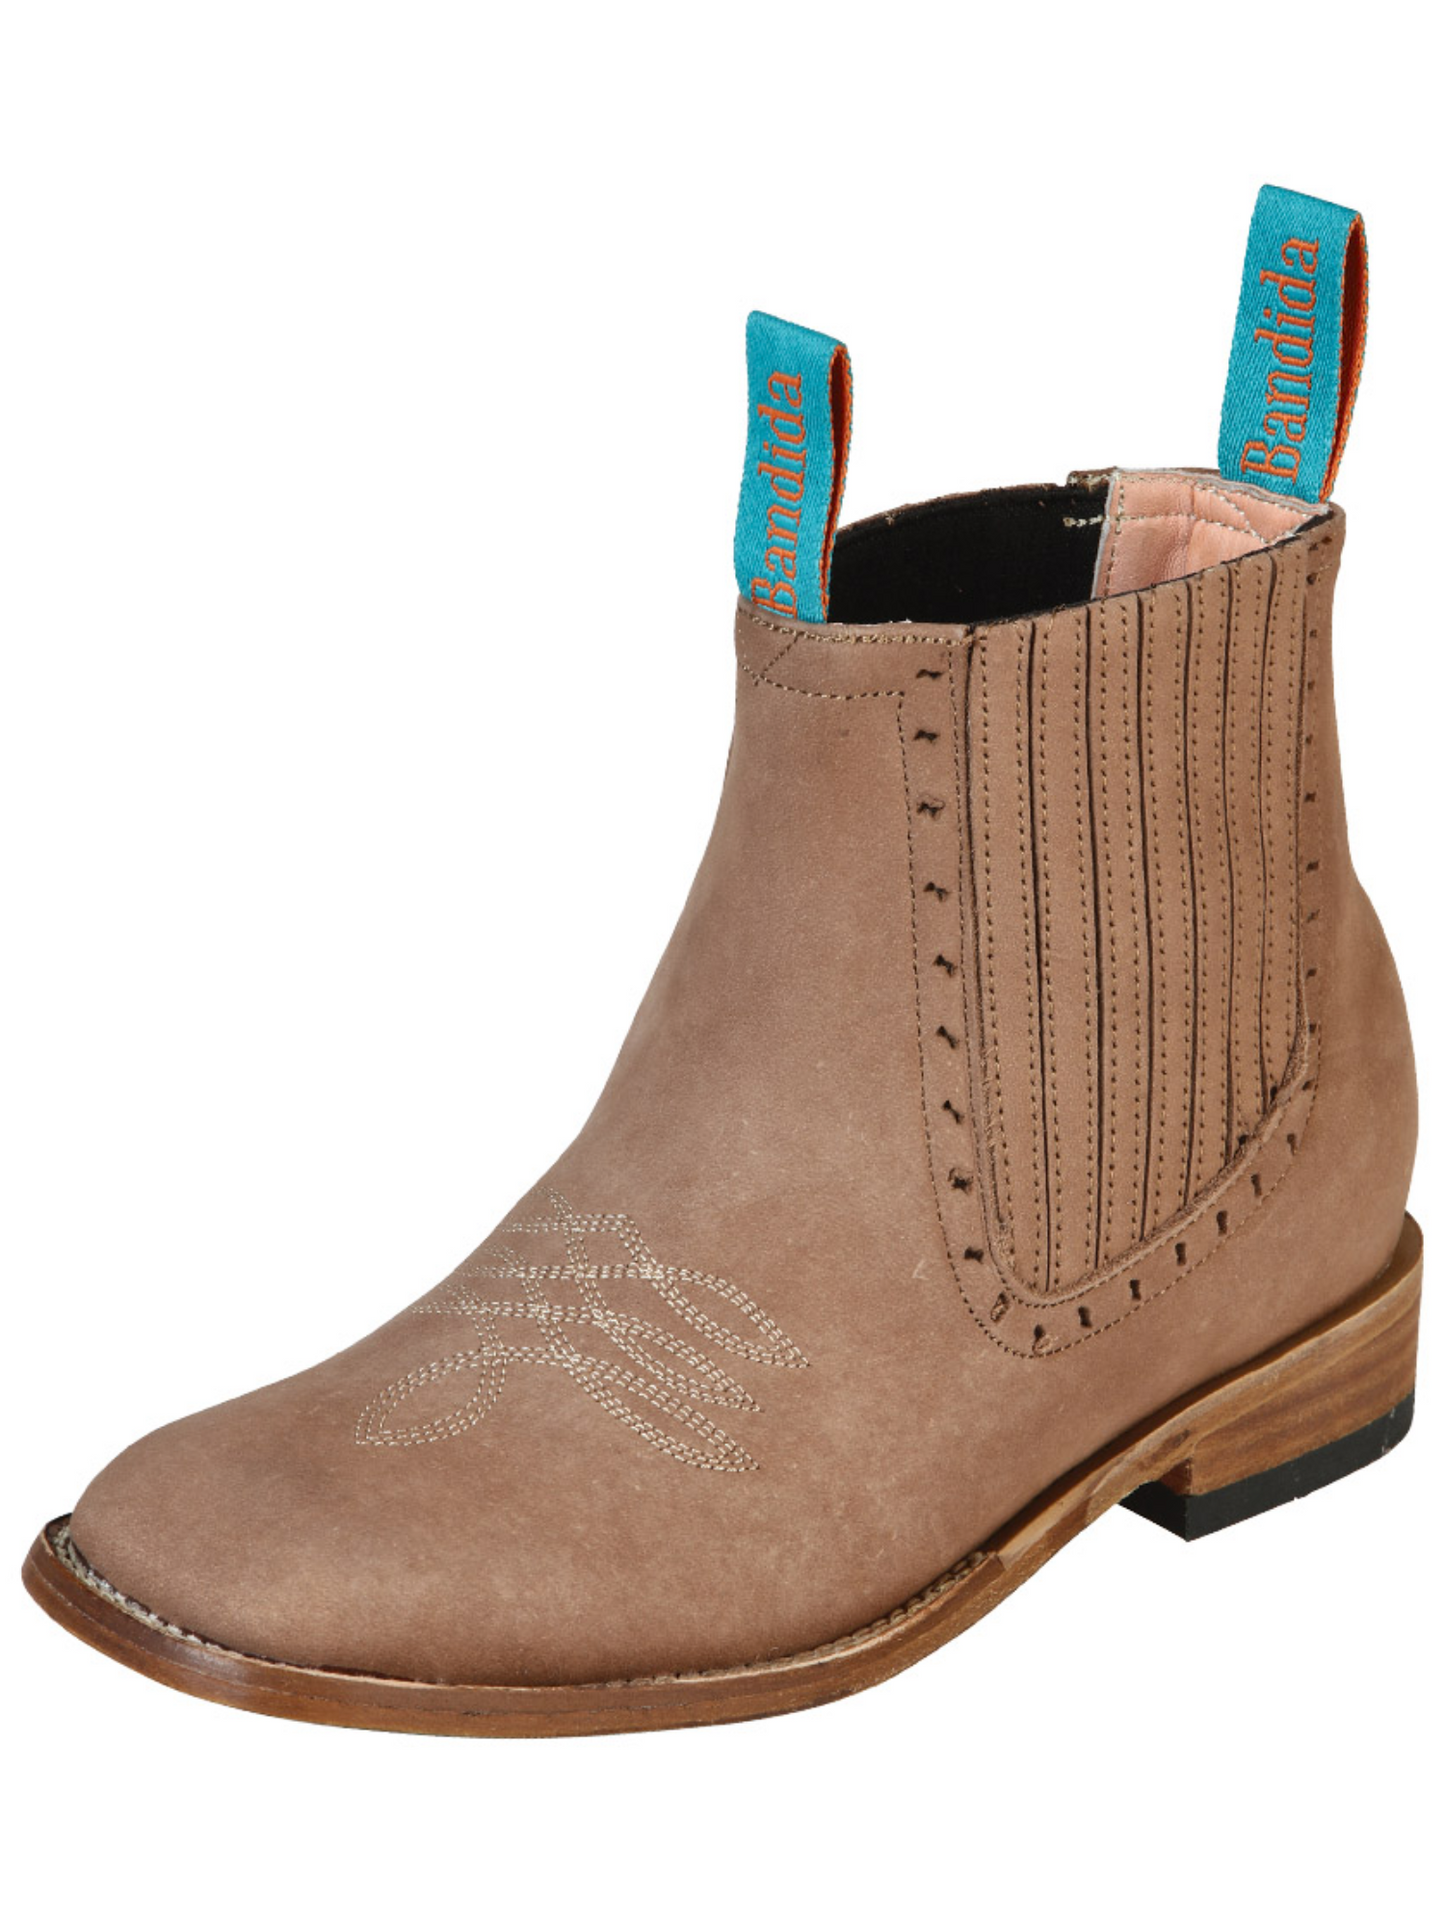 Classic Nubuck Leather Rodeo Cowboy Ankle Boots for Women 'La Barca' - ID: 126665 Western Ankle Boots La Barca Topo